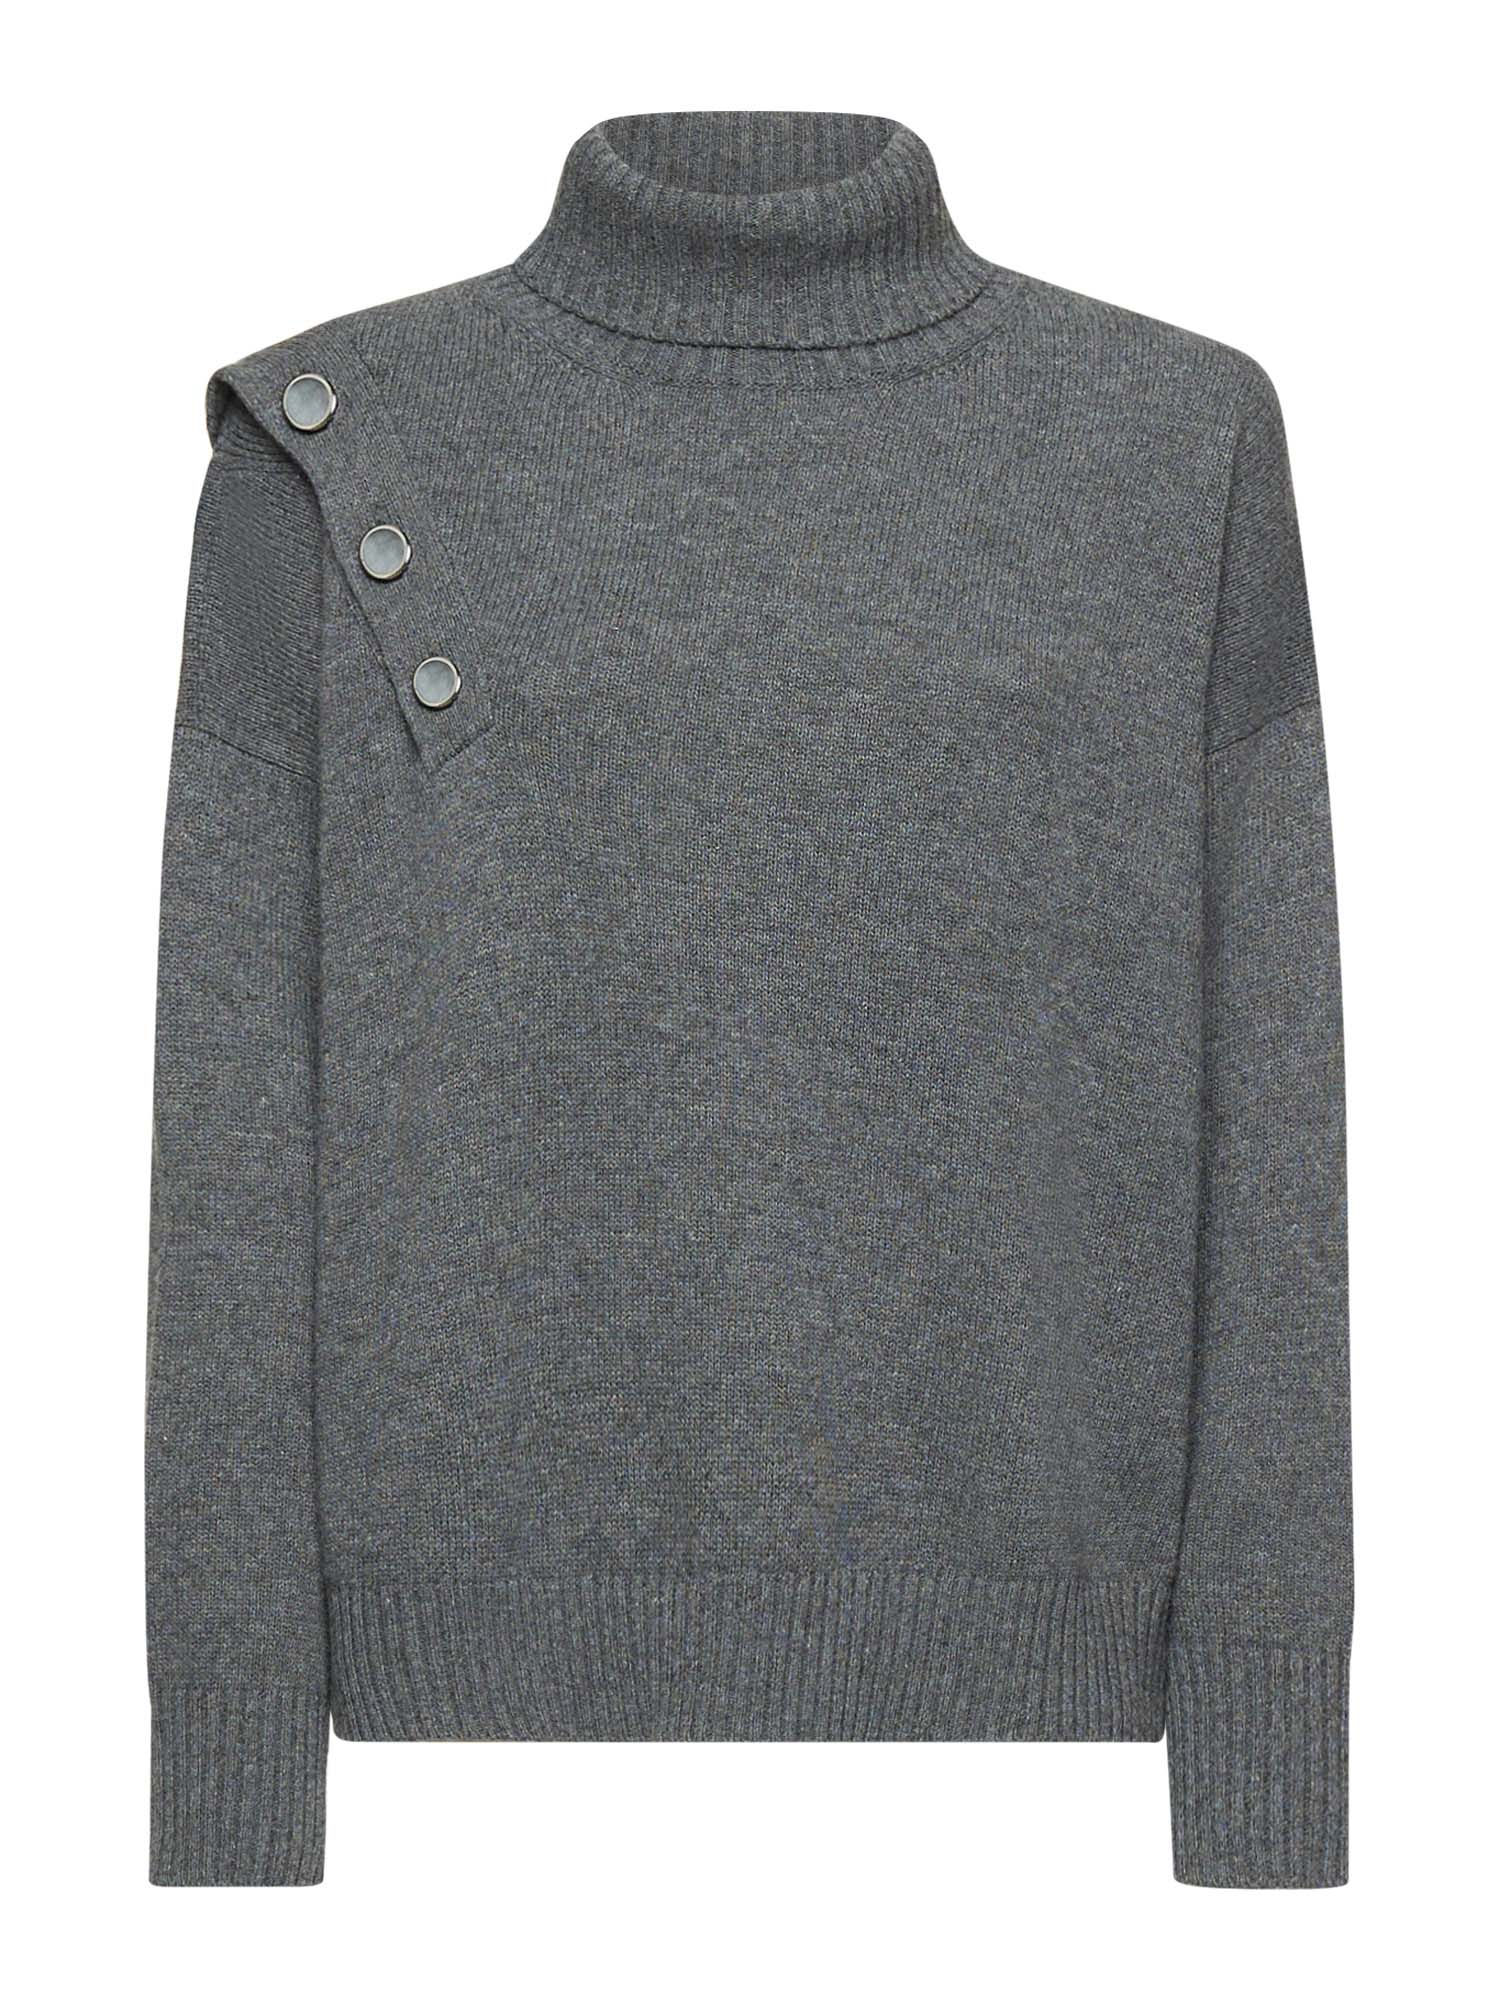 Cashmere-blend sweater with button detail